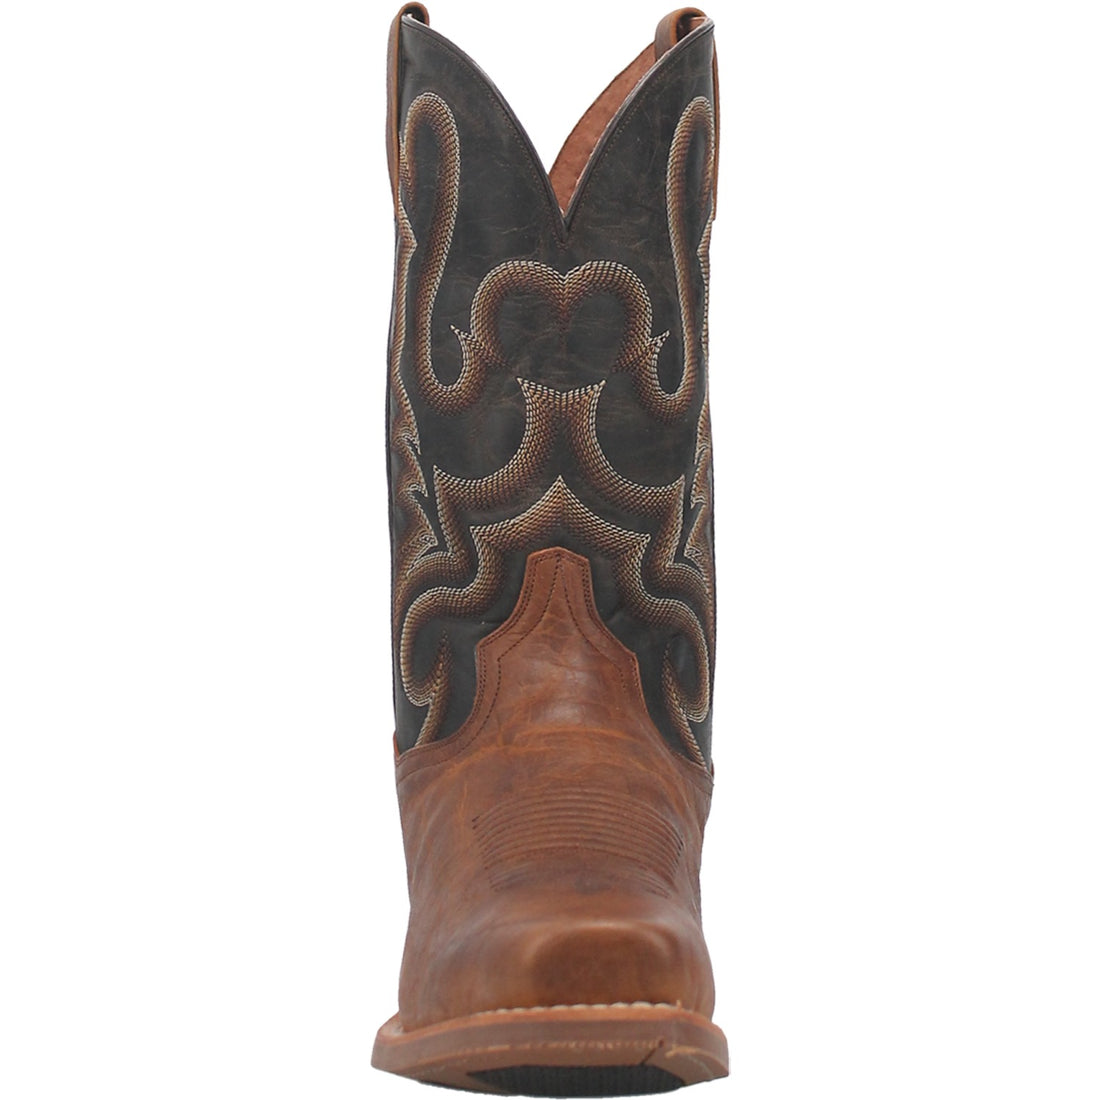 RICHLAND BISON LEATHER BOOT